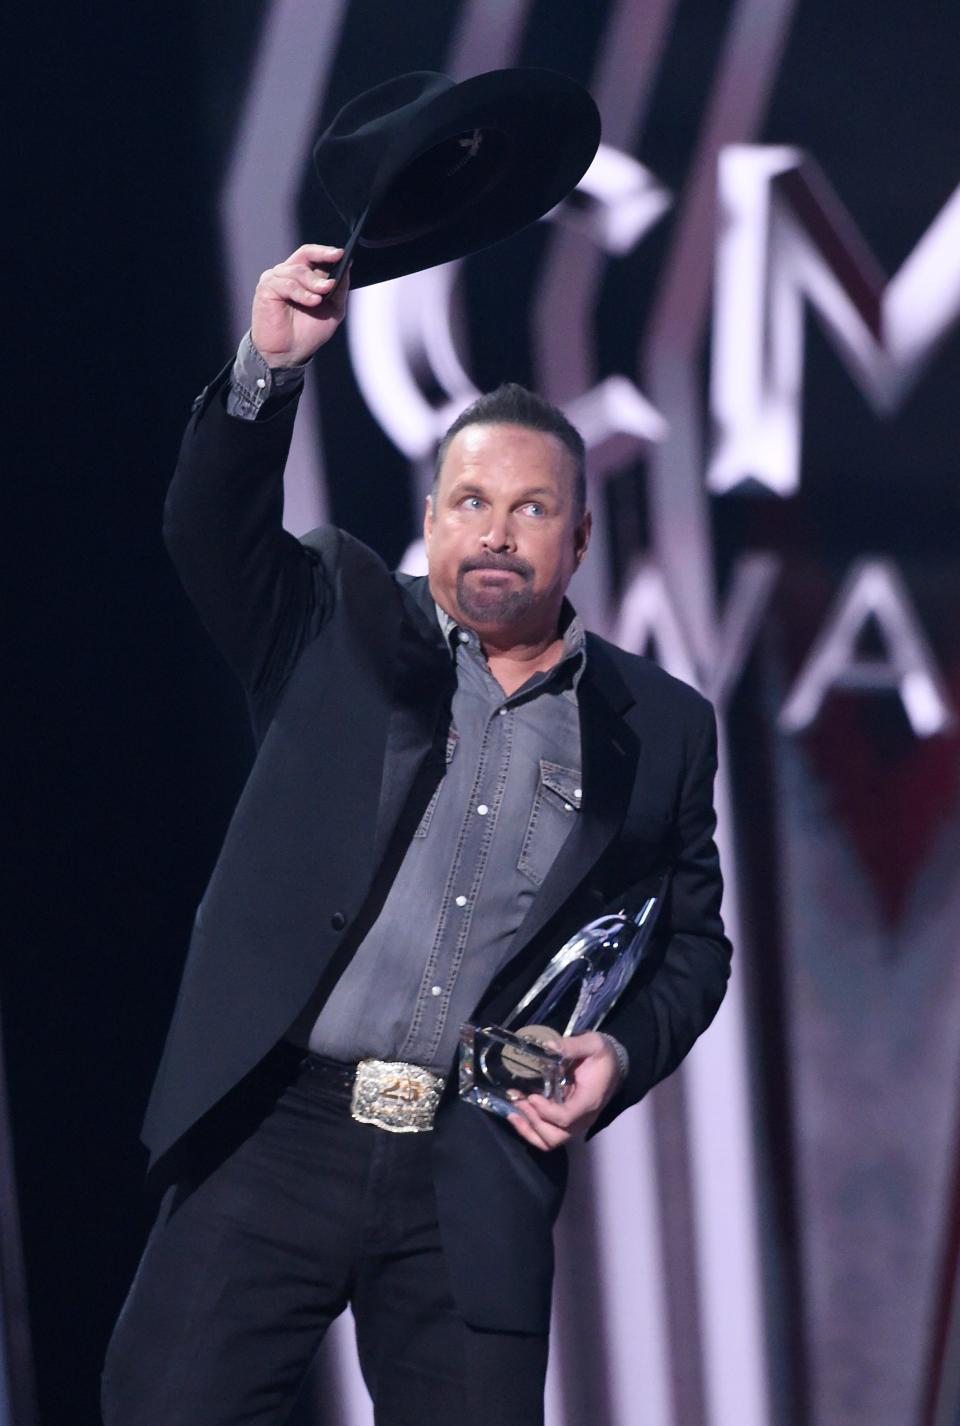 Garth Brooks holds the Entertainer of the Year Award at the 53rd Annual CMA Awards at Bridgestone Arena Wednesday, Nov. 13, 2019 in Nashville, Tenn.

